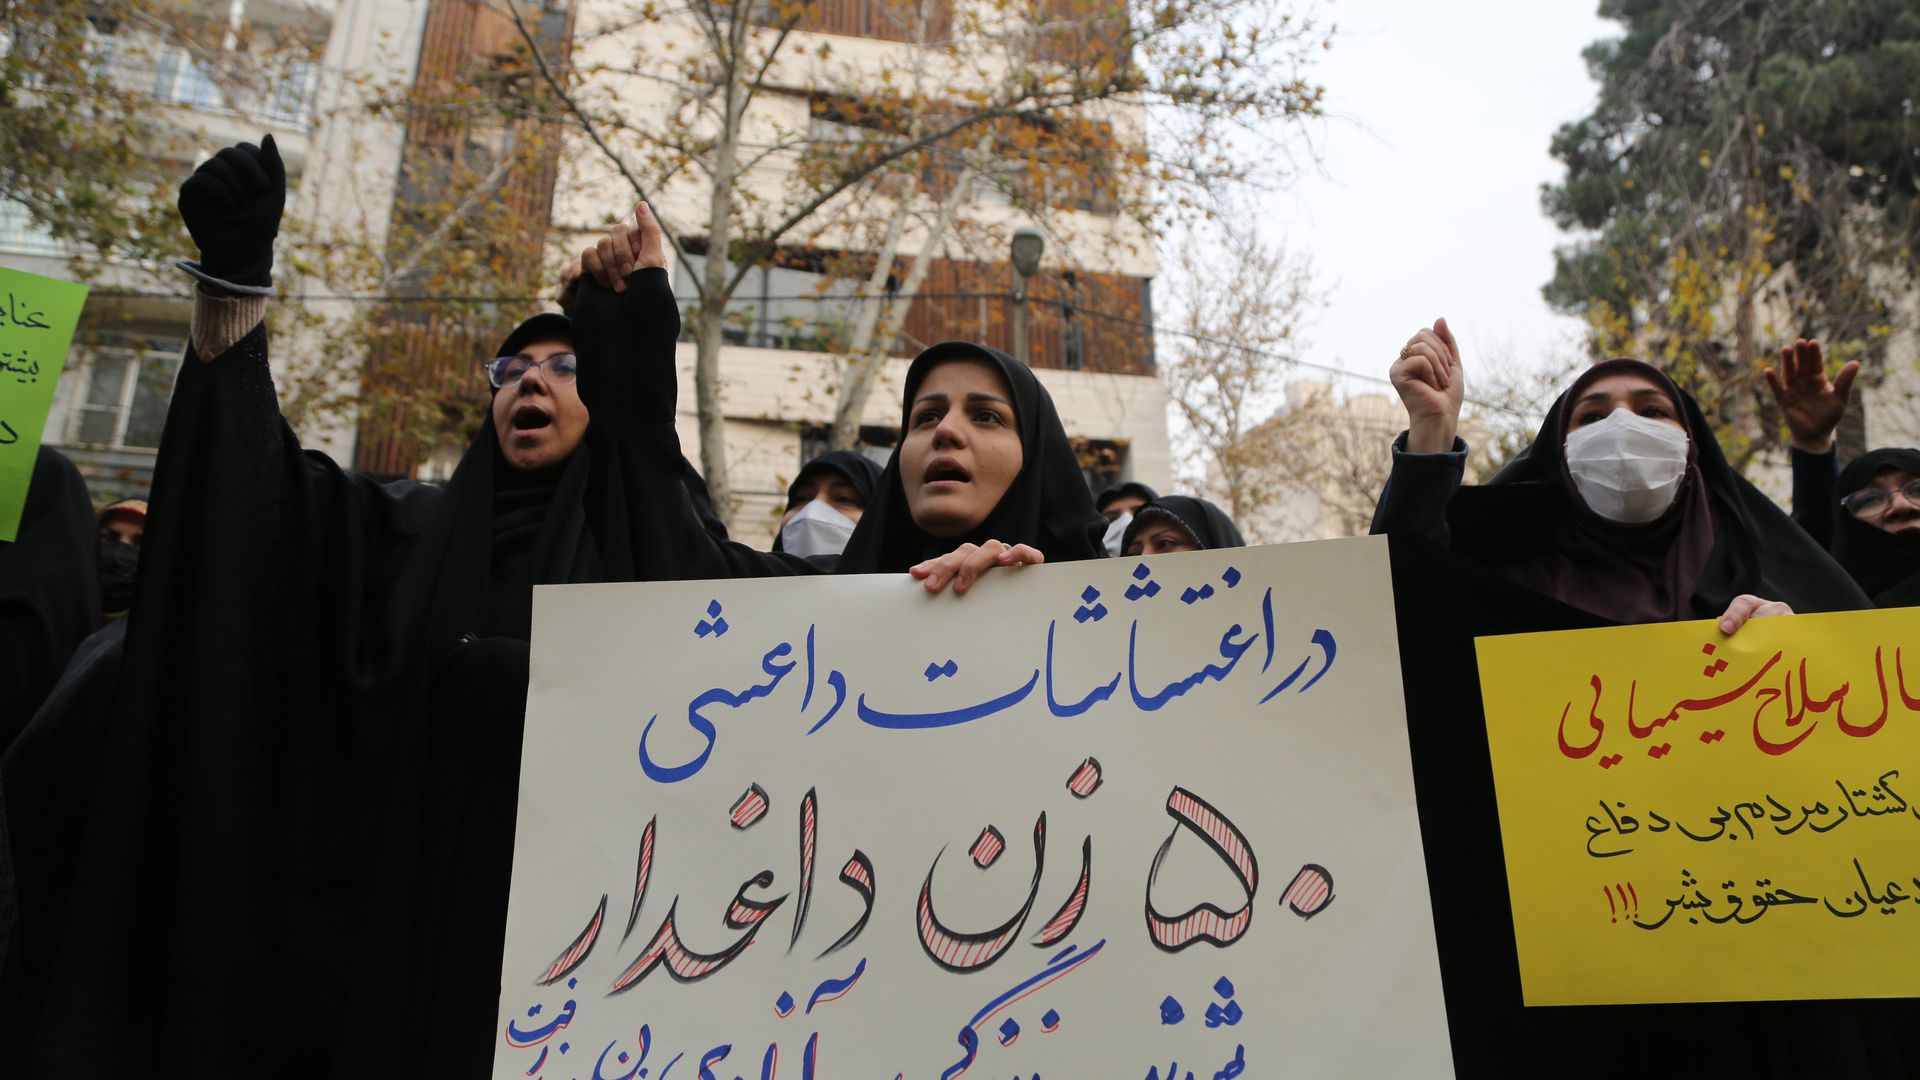 Photo of Iranian women raising their fists and holding signs at a protest